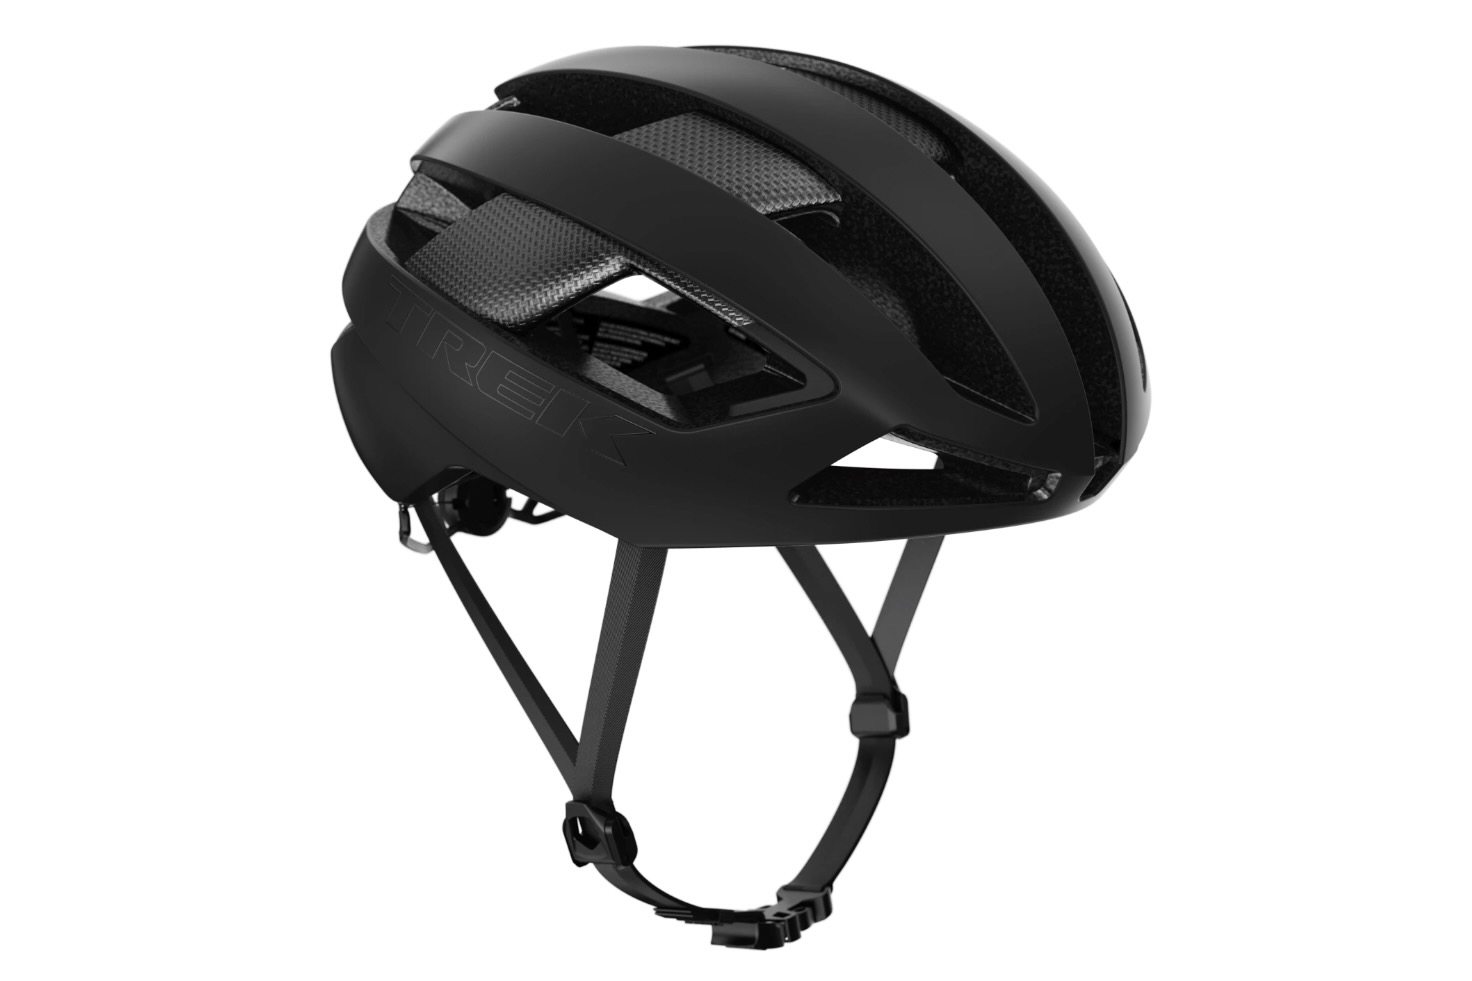  ABUS AirBreaker Racing Bike Helmet - High-End Bike Helmet for  Professional Cycling - Unisex, for Men and Women - Black, Size S : Sports &  Outdoors